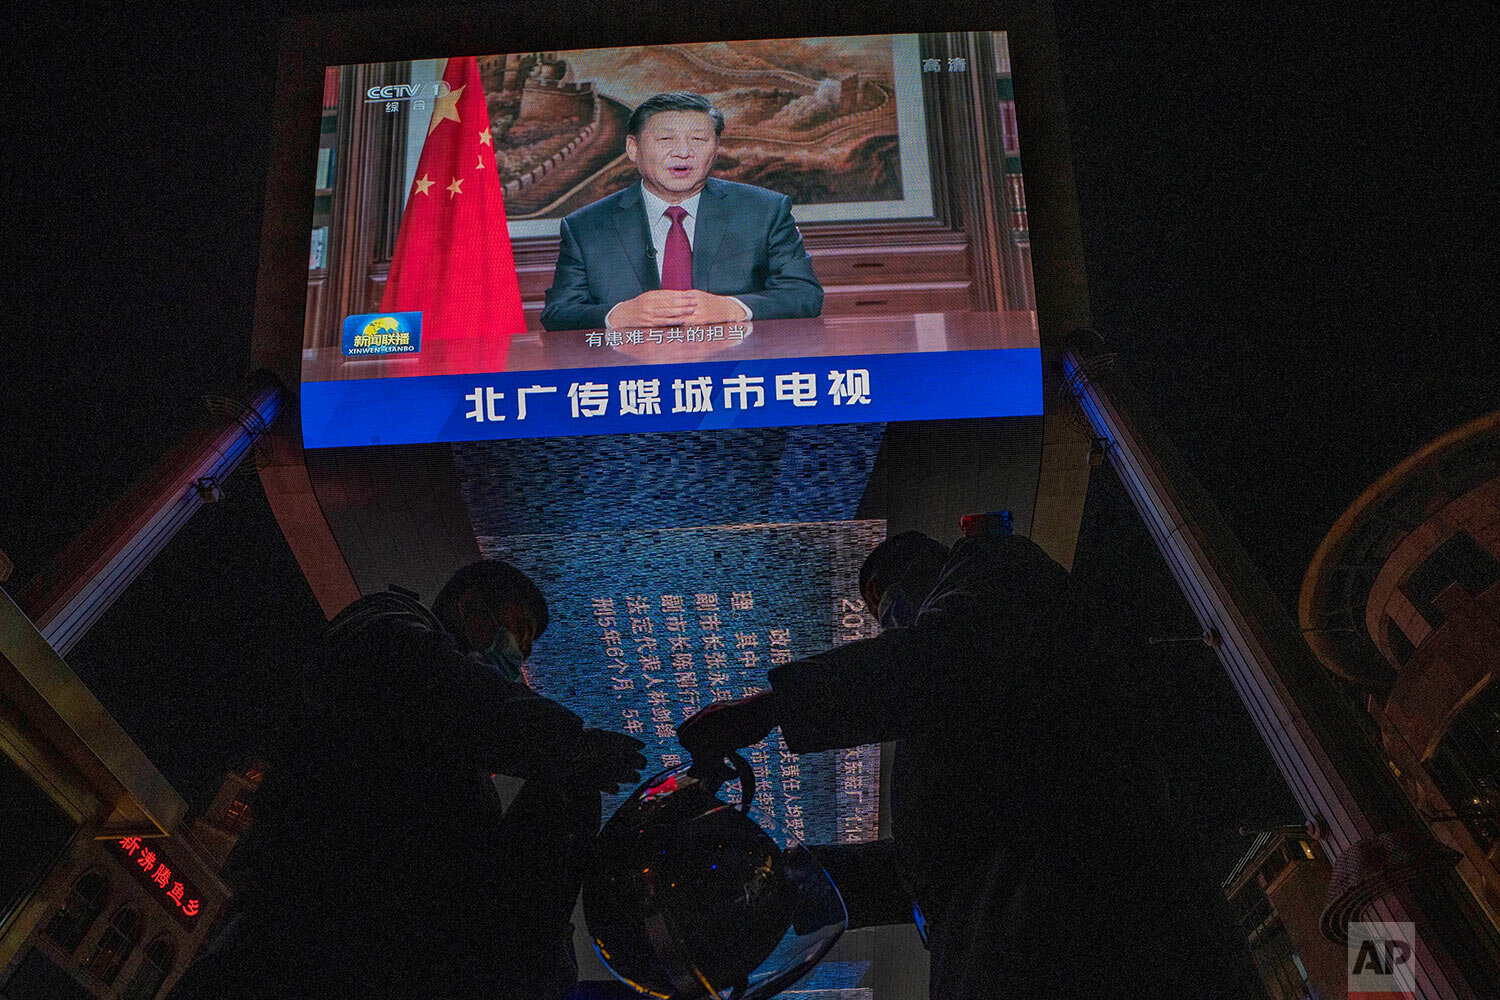  Security guards change shift under a screen showing Chinese President Xi Jinping delivering a speech for the evening news broadcast in Beijing Thursday, Dec. 31, 2020.  (AP Photo/Ng Han Guan) 